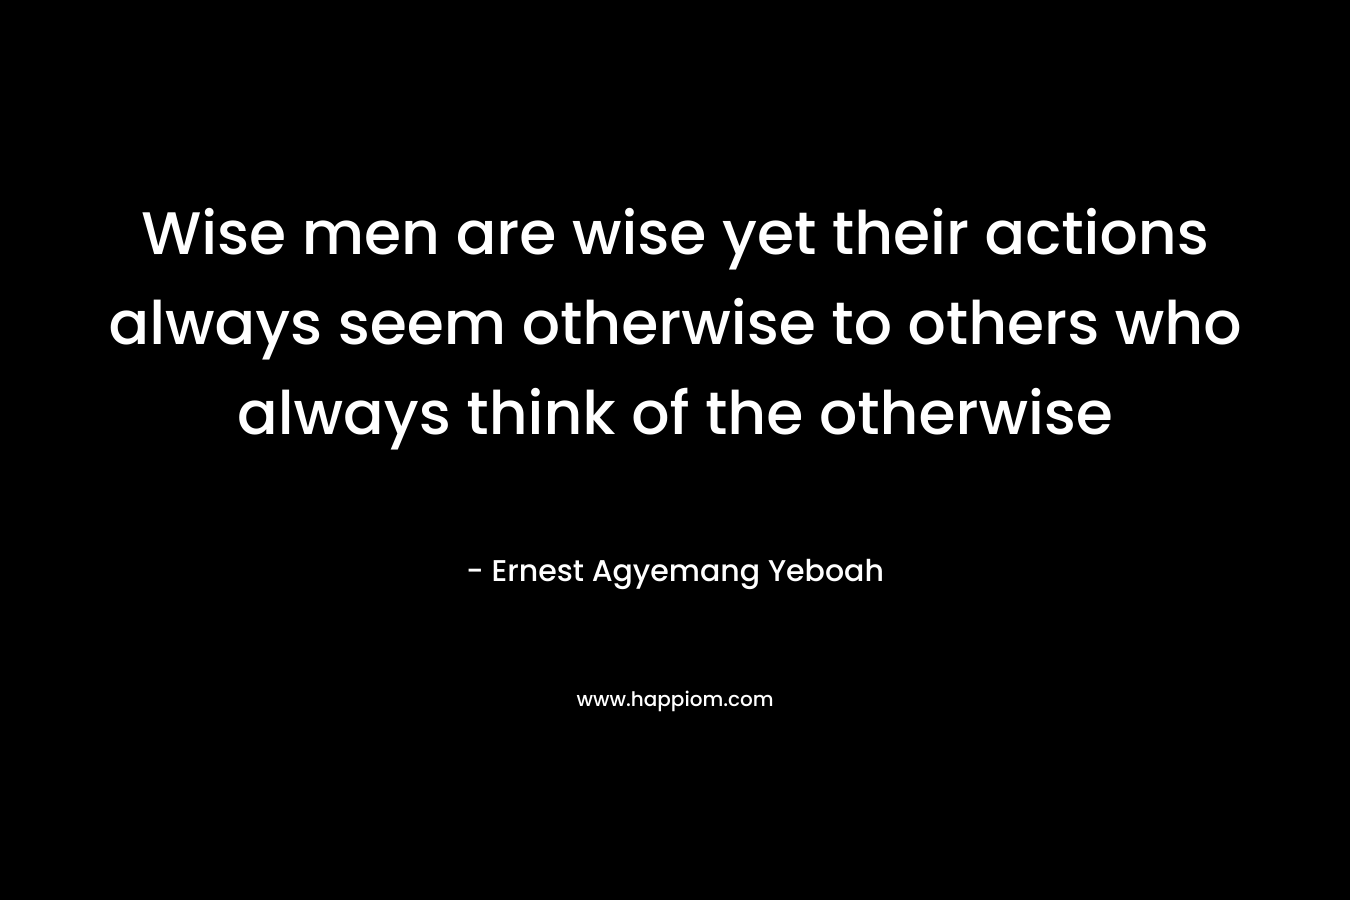 Wise men are wise yet their actions always seem otherwise to others who always think of the otherwise